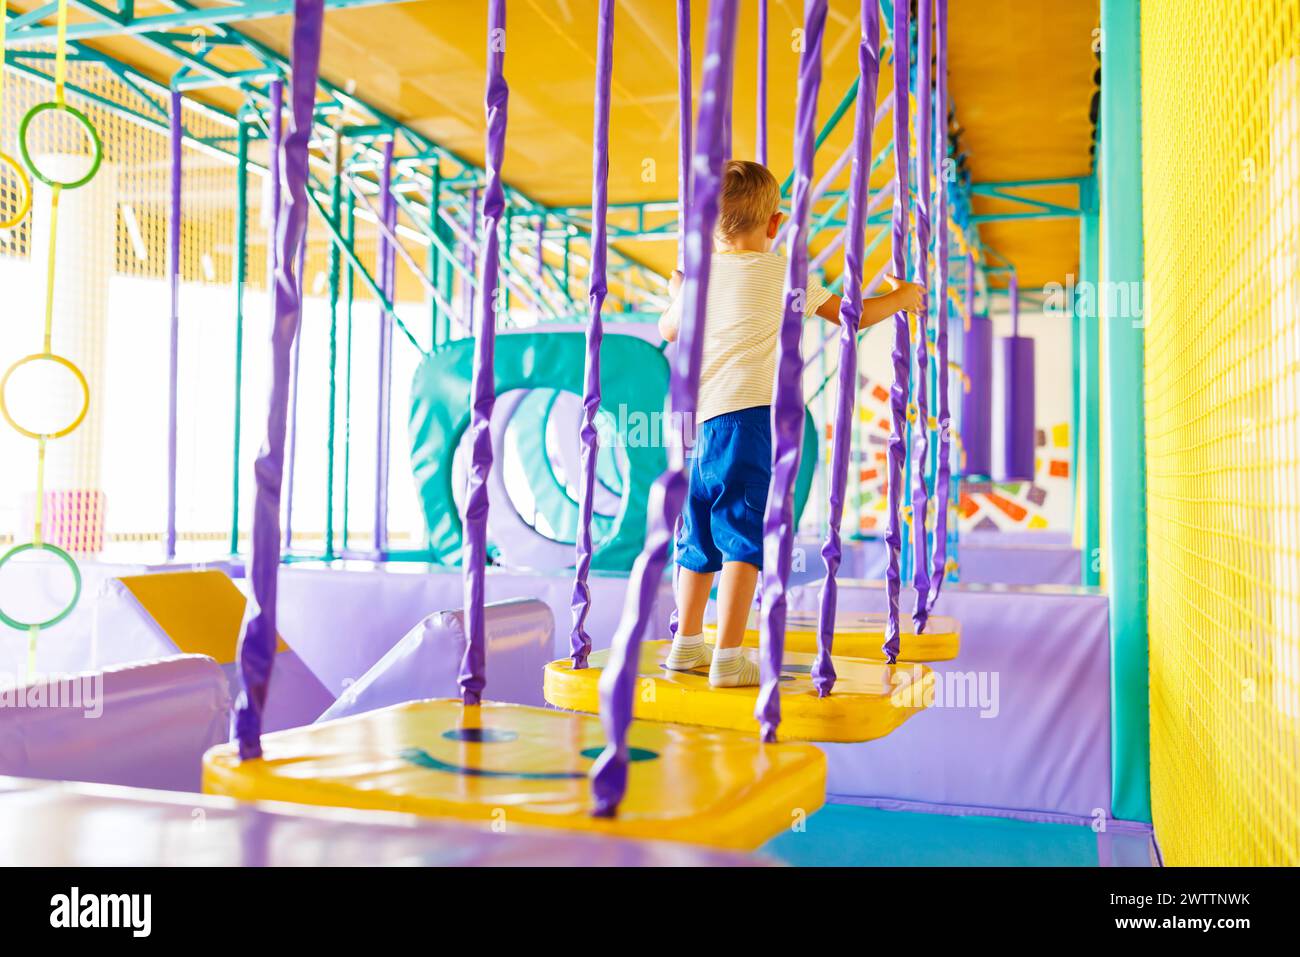 Child navigating through purple and yellow play structure in indoor playground. Stock Photo